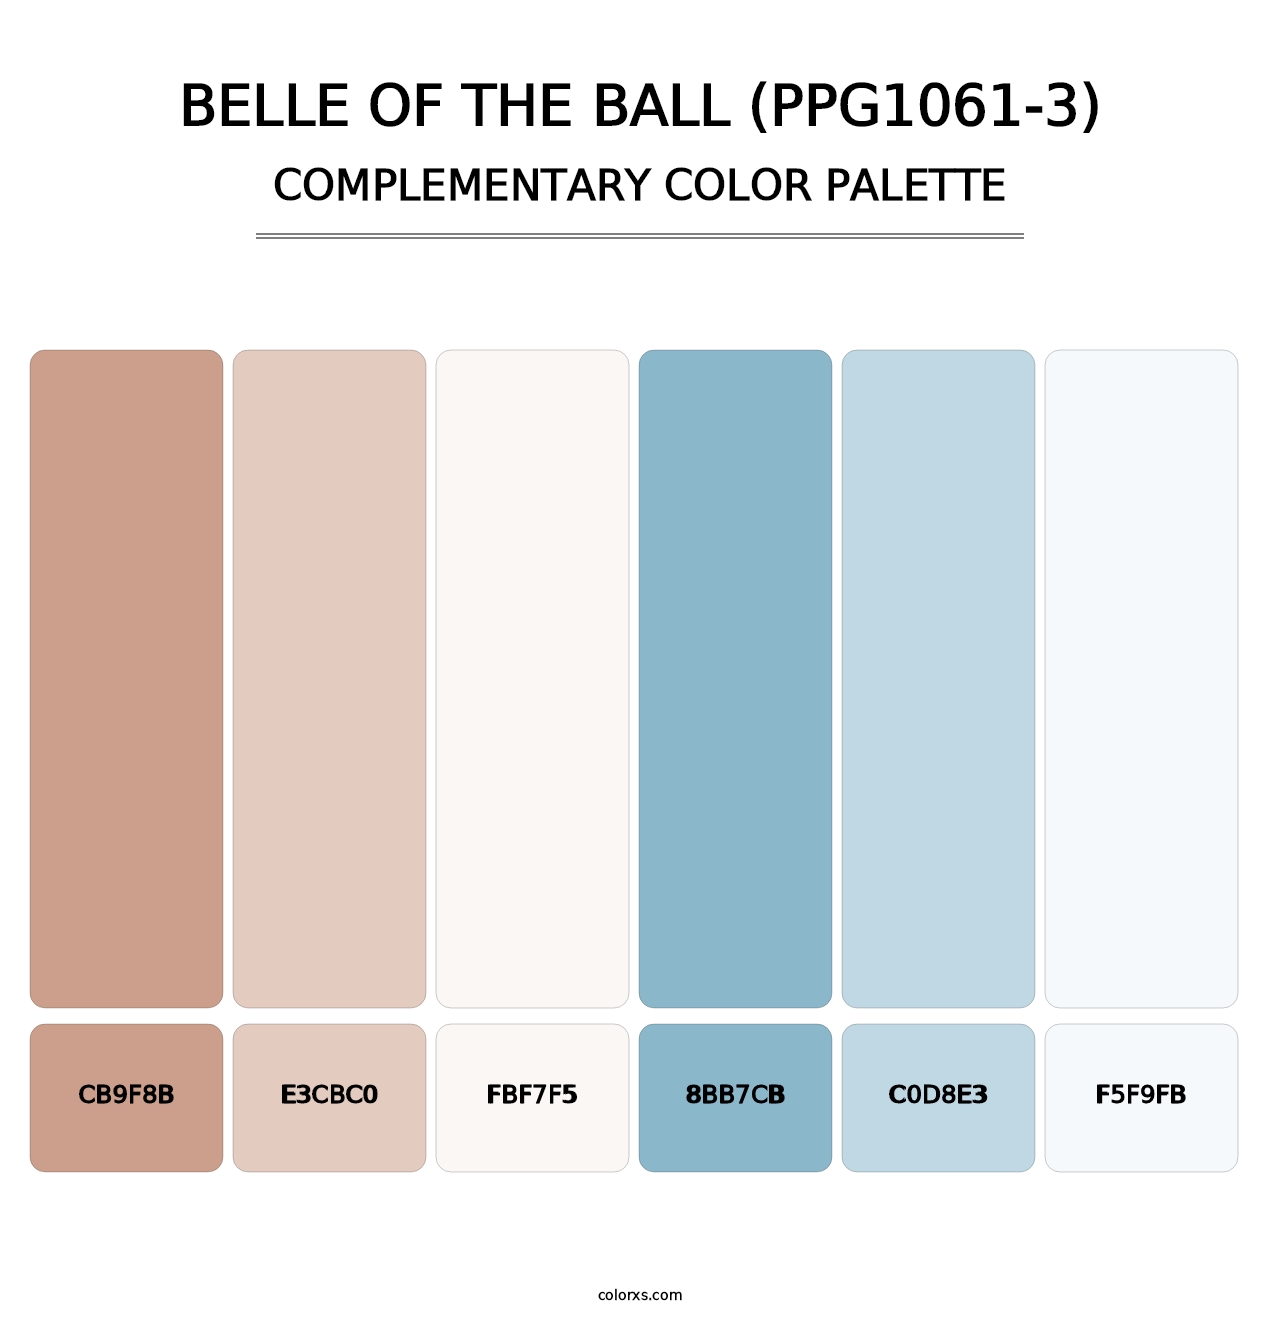 Belle Of The Ball (PPG1061-3) - Complementary Color Palette